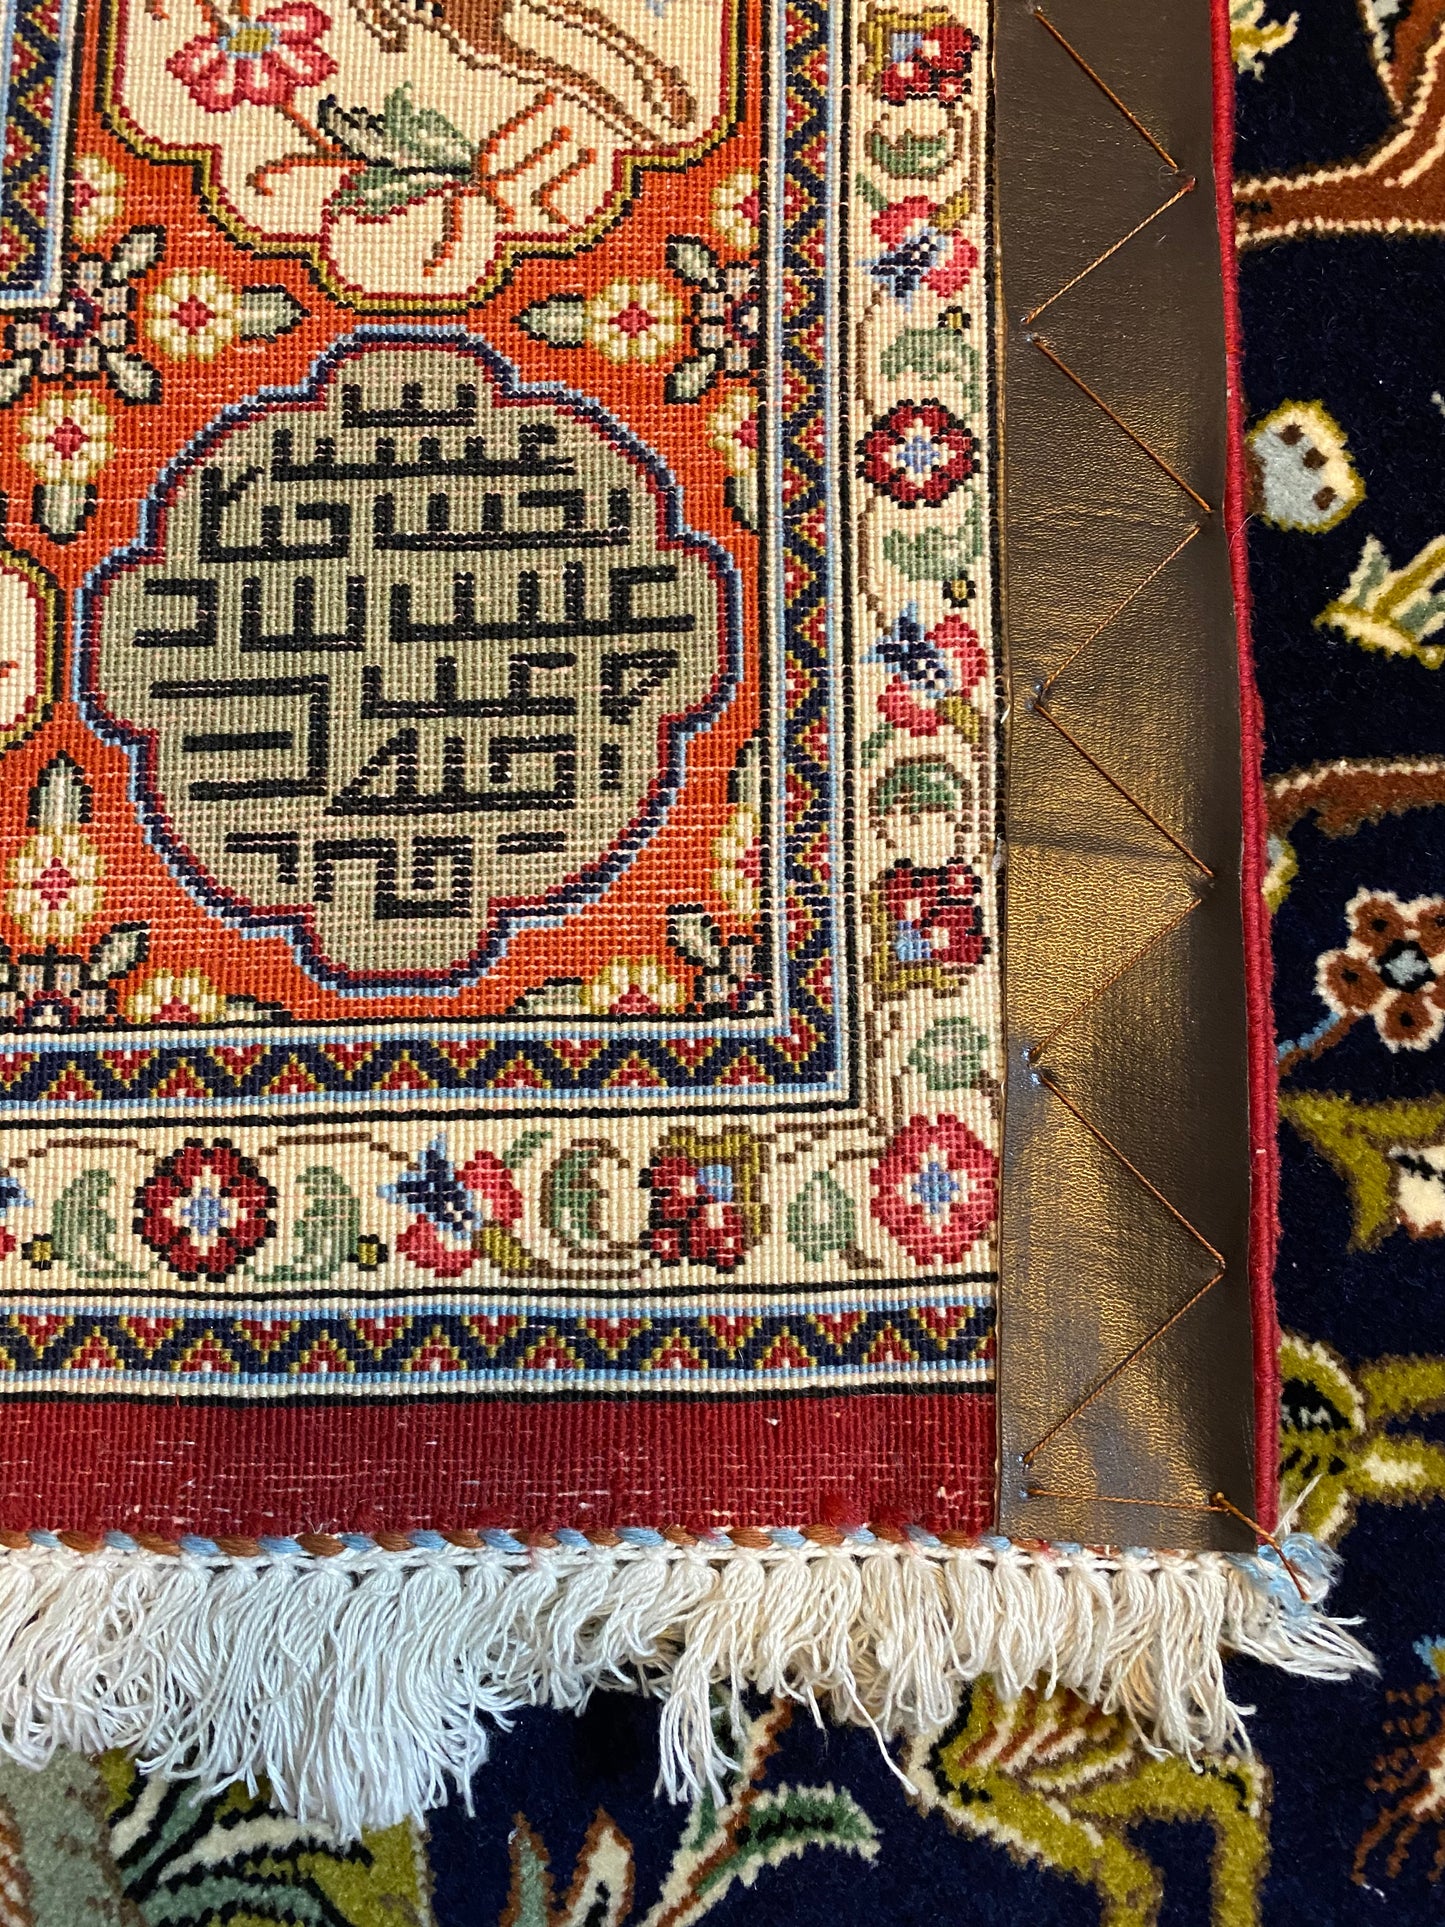 A high quality Persian hand-knotted atelier carpet made in the Ghom district. Size ca 140 x 200 cm